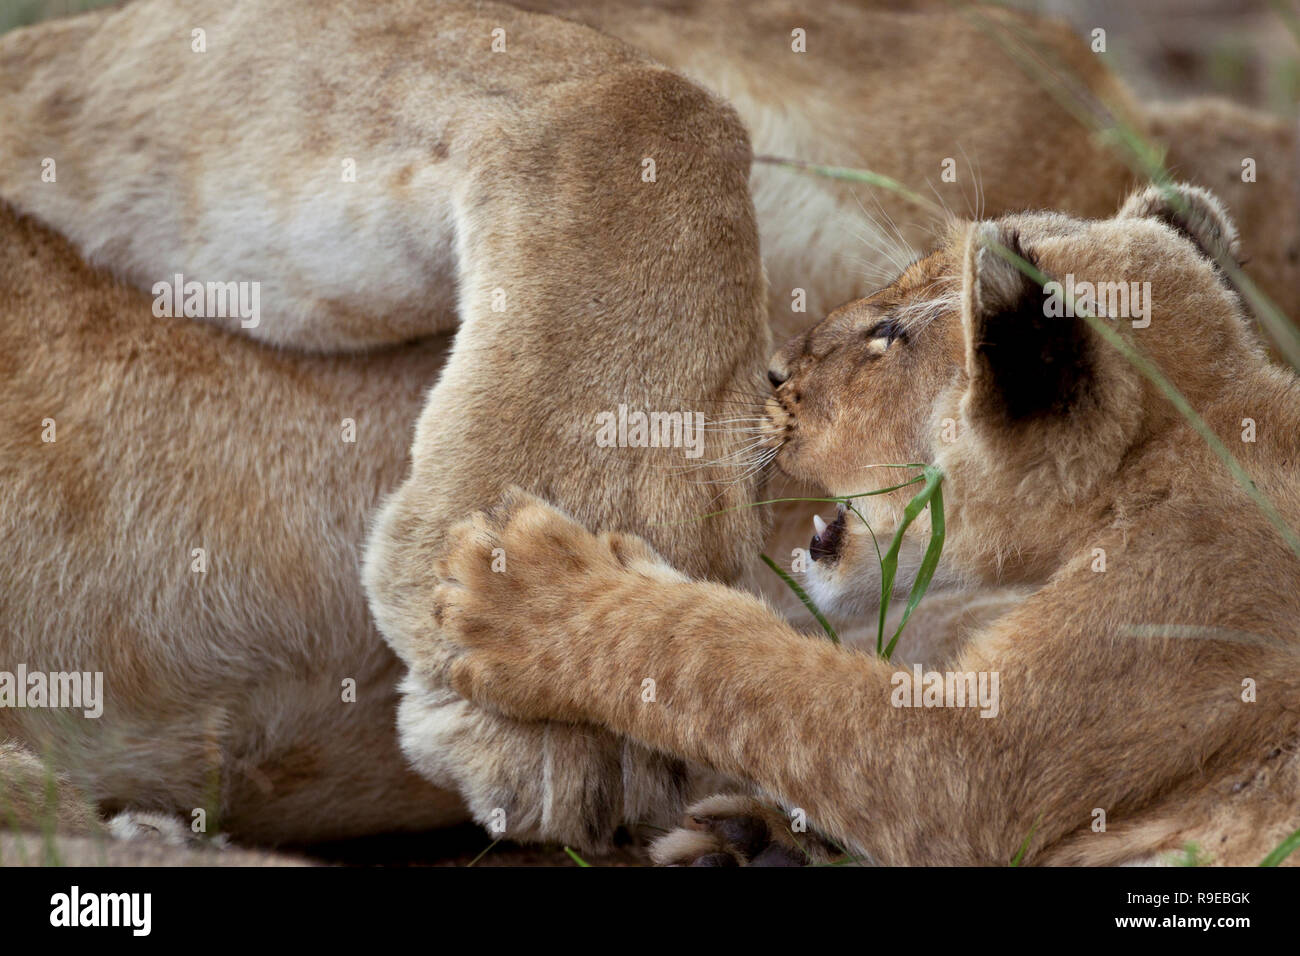 cute lion cub playing and grabbing mom's paw Stock Photo